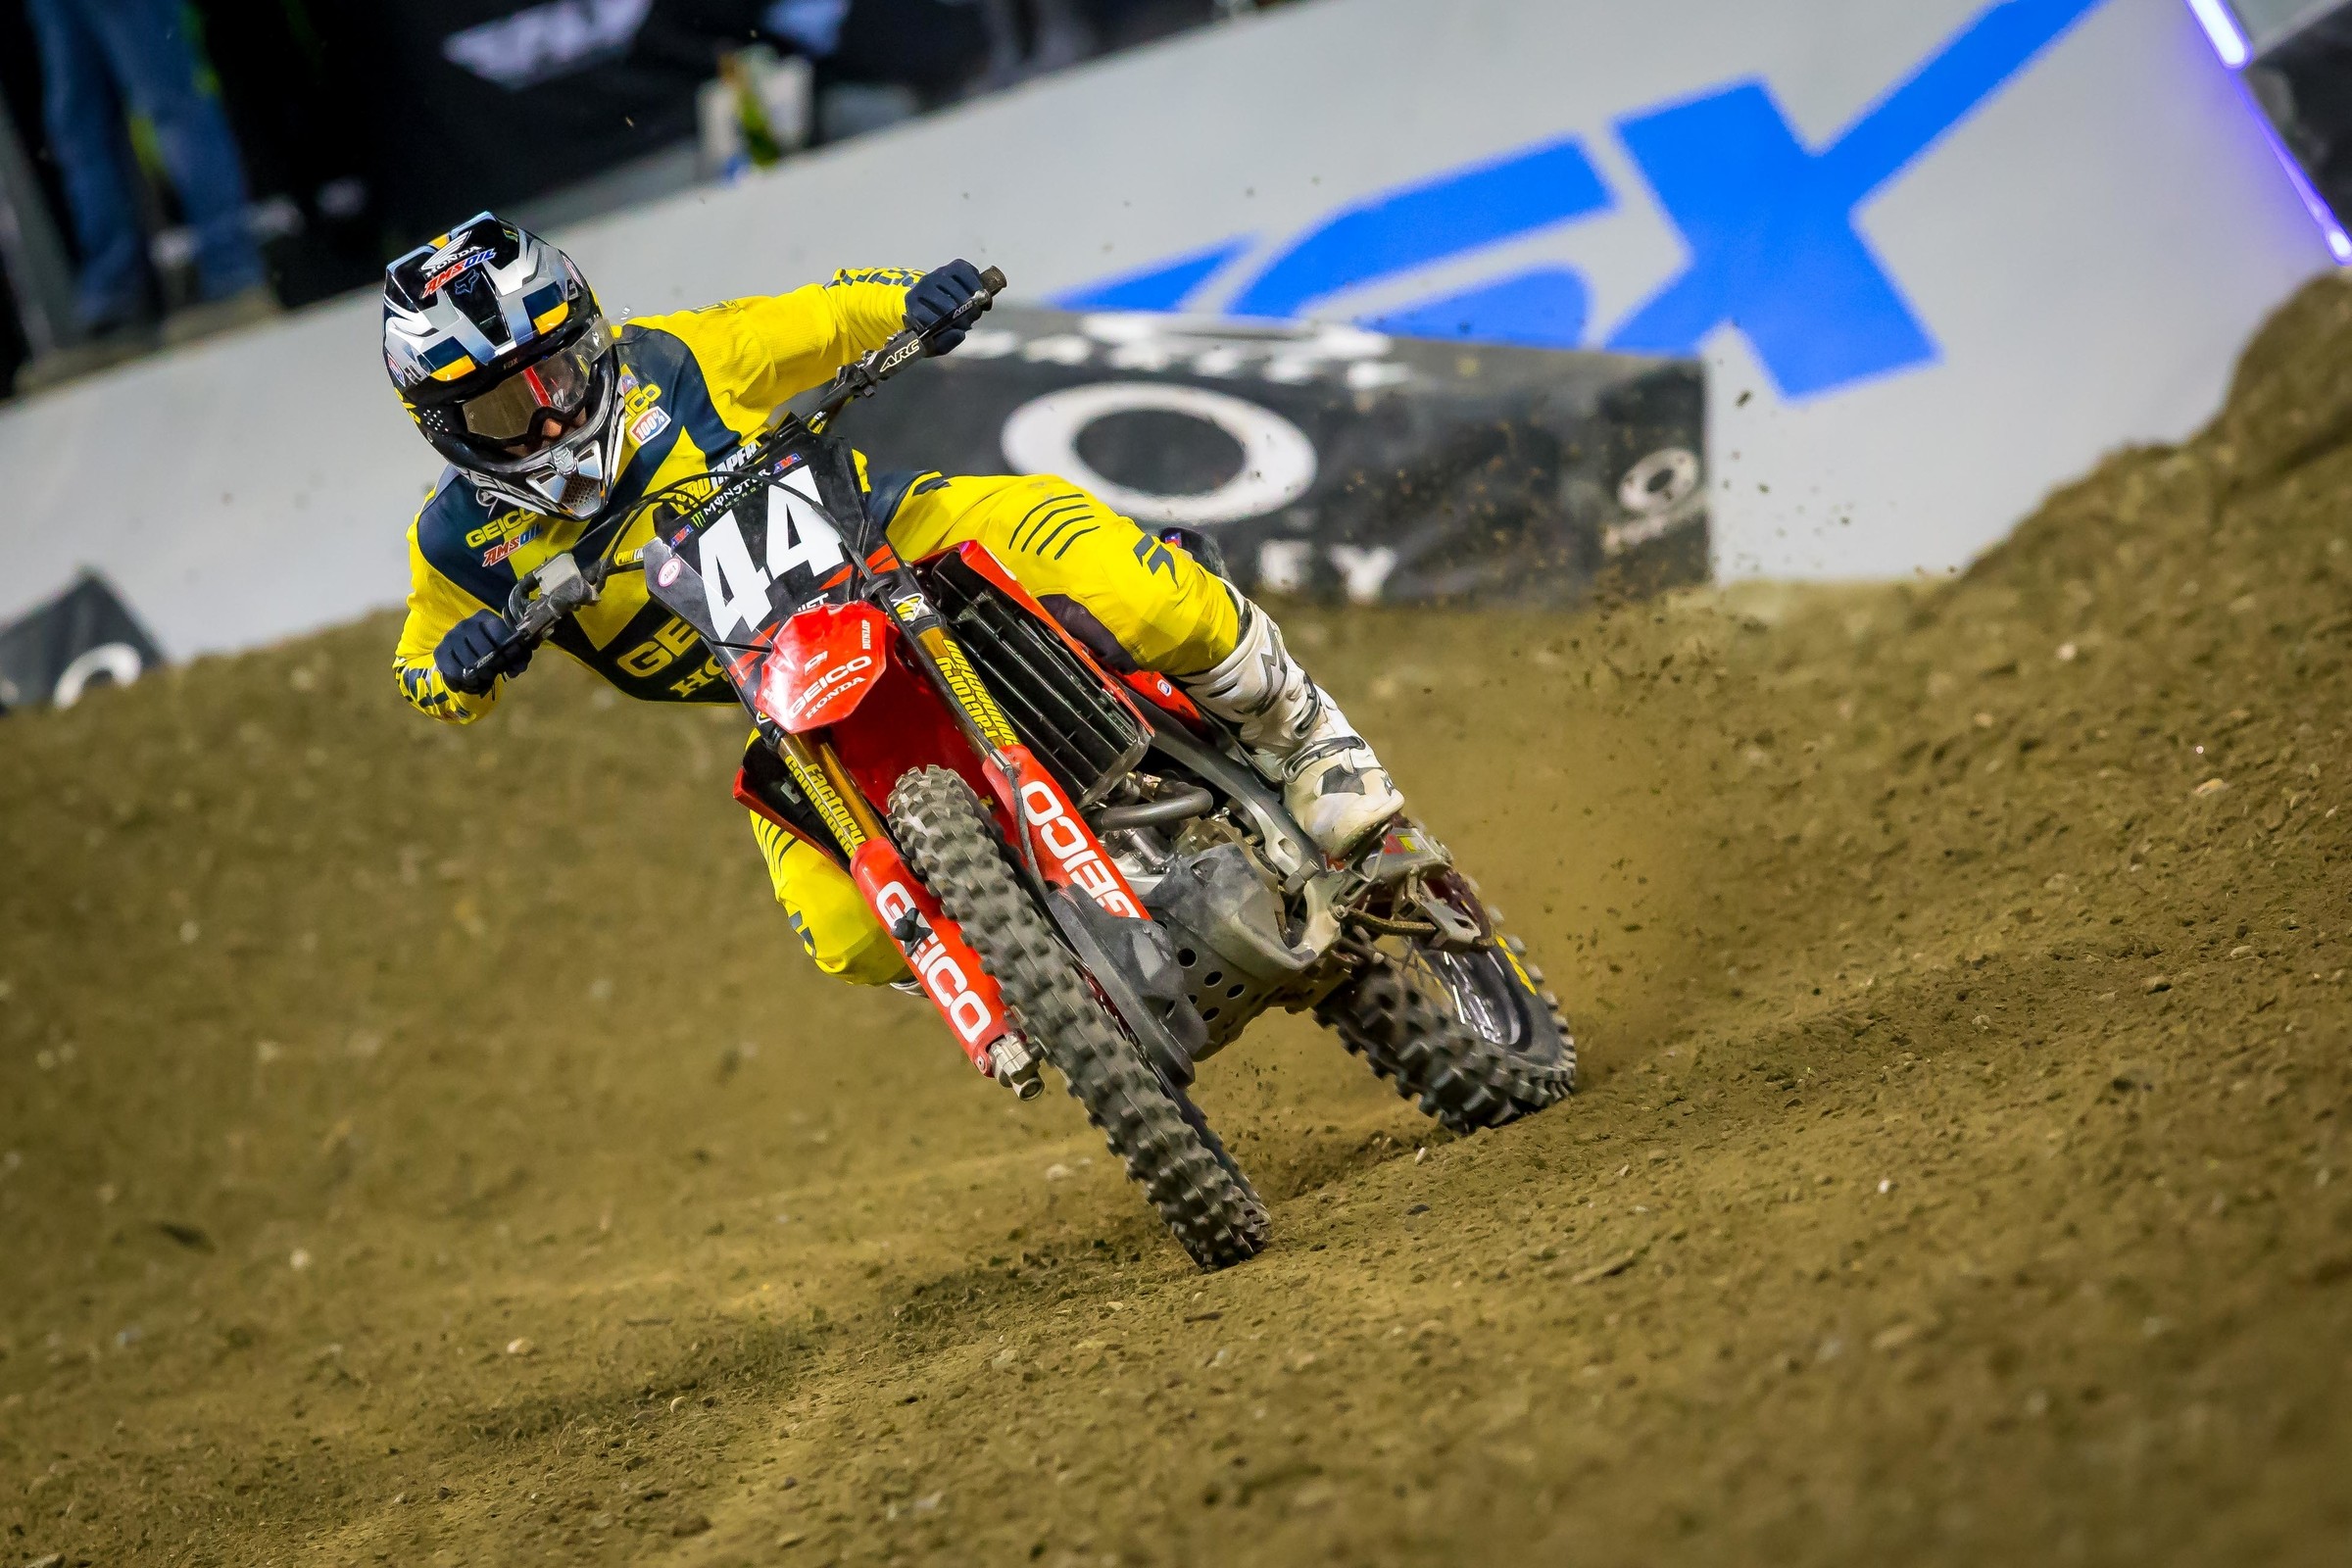 How to Watch 2019 Denver Supercross and More